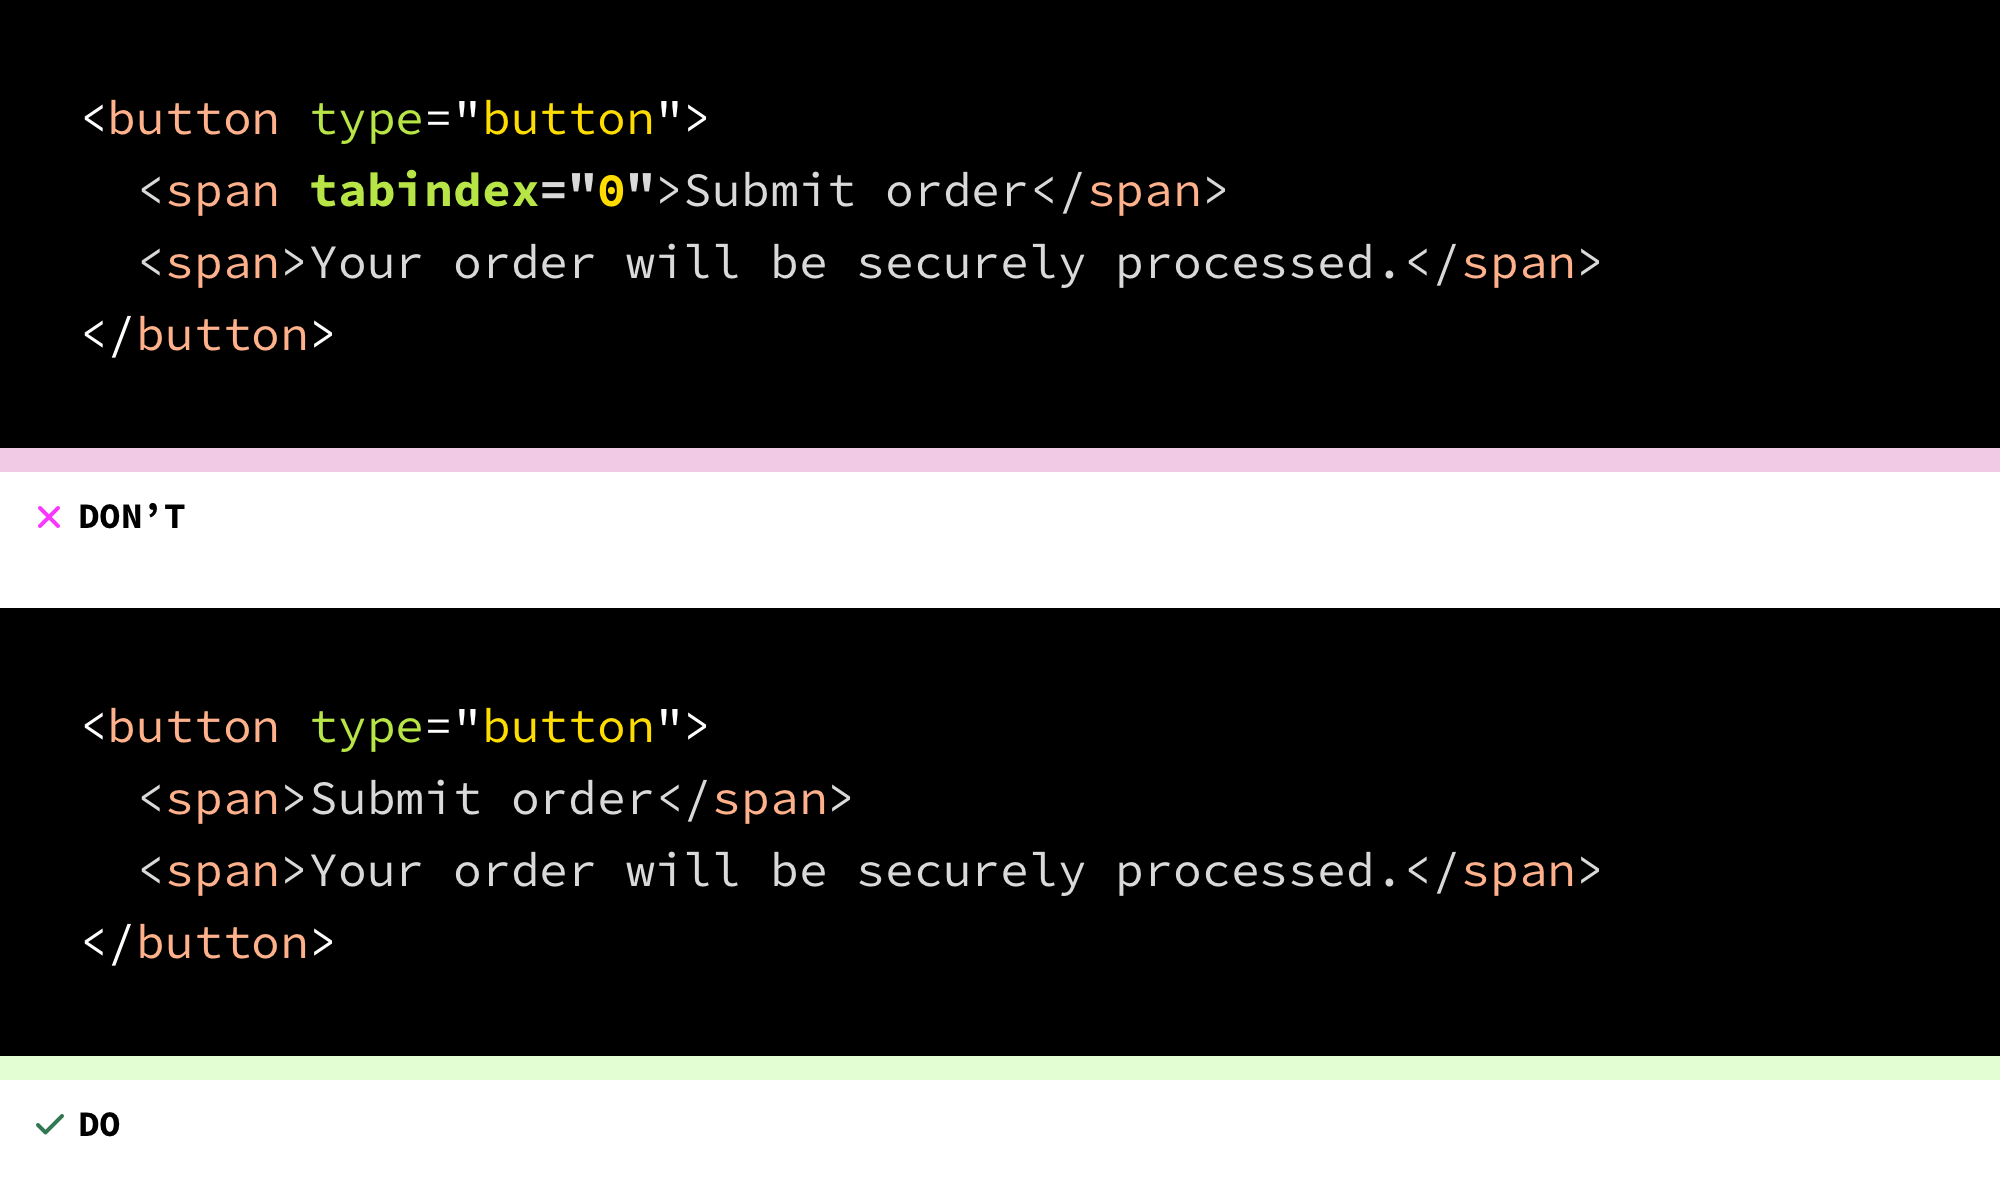 Two code examples, one labeled “don't,” the other labeled “do.” The example labeled “don't” shows a button element that contains two span elements. The first span element wraps the text, “Submit order” and has a declaration of tabindex='0' applied to it. The second span element wraps the text, “Your order will be securely processed.” The example labeled “do” removes the tabindex declaration.